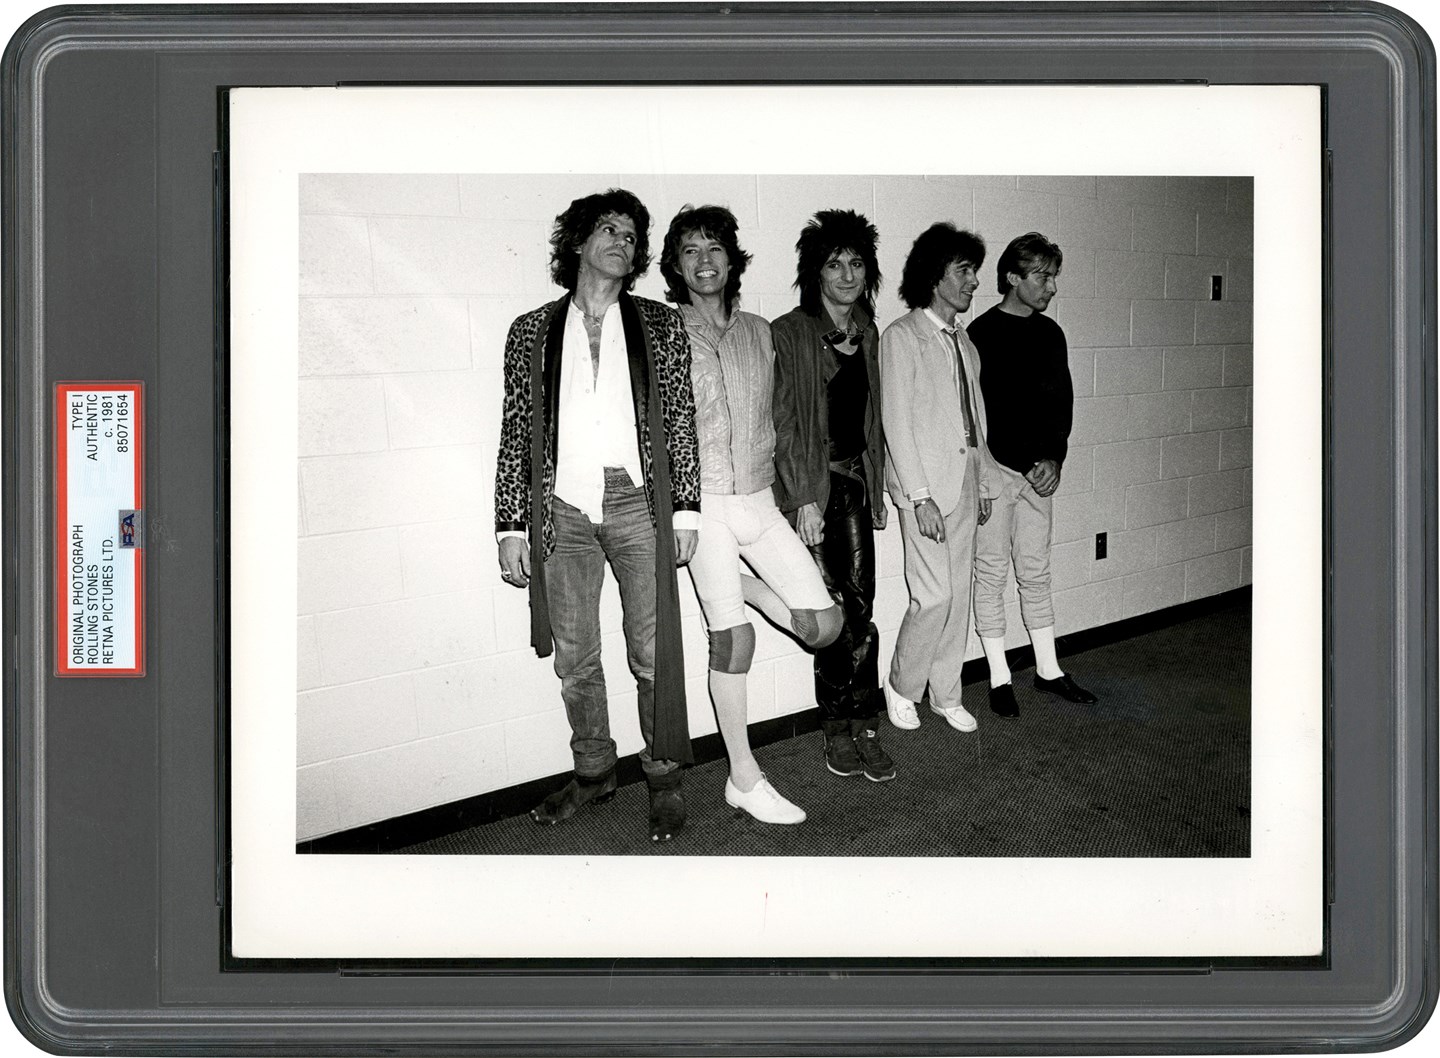 Rock And Pop Culture - 1981 The Rolling Stones at Byrne Arena Original Photograph (PSA Type I)